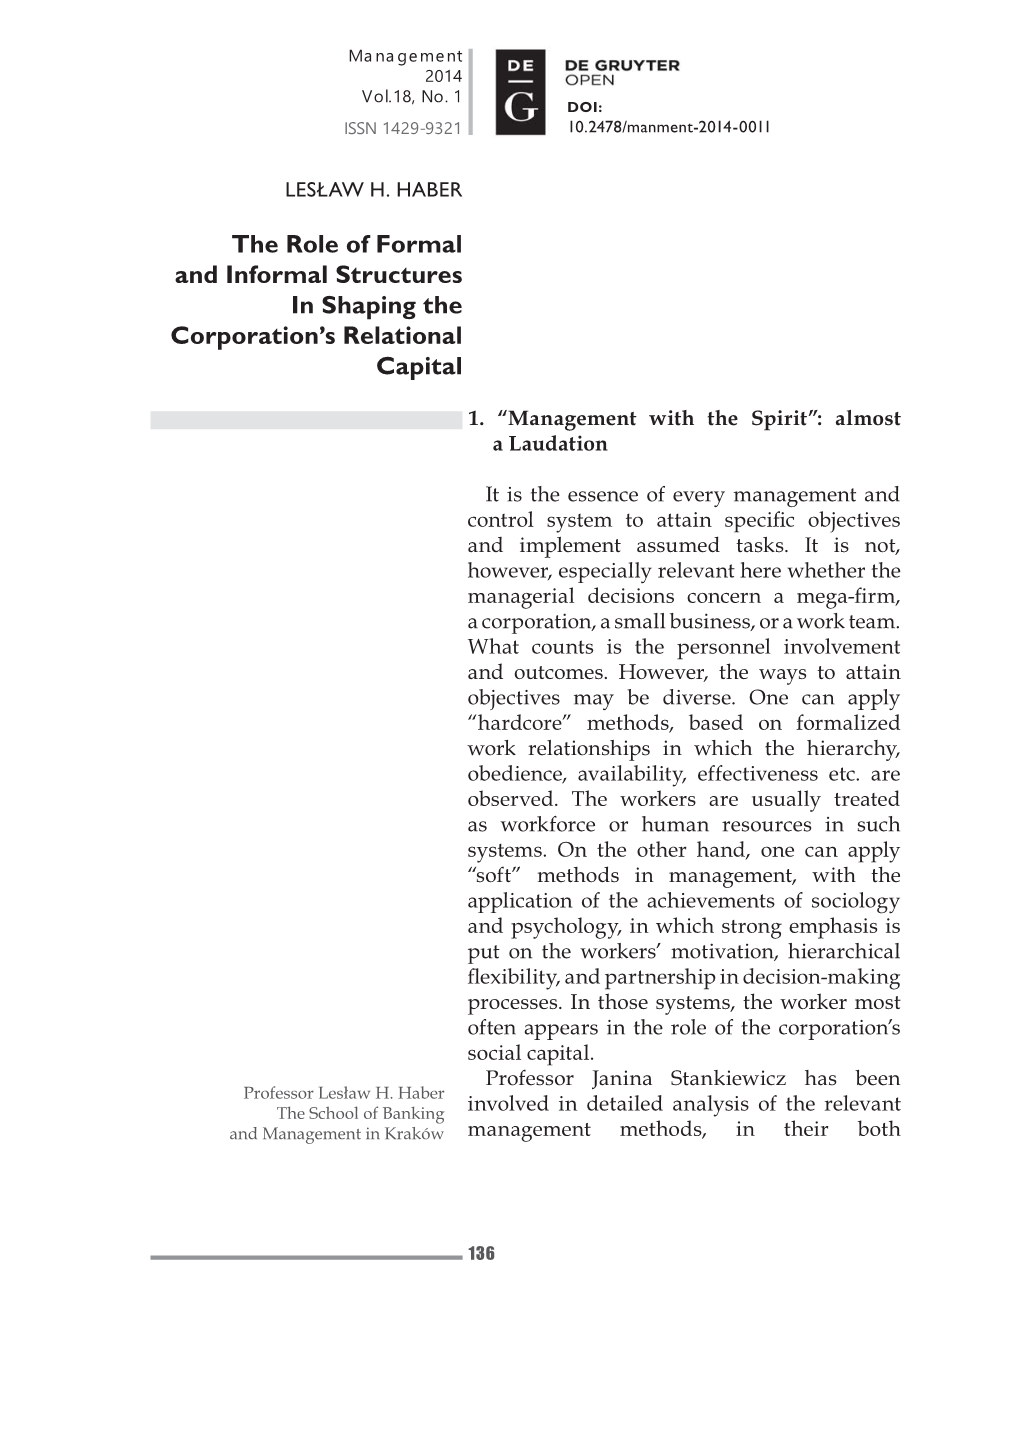 The Role of Formal and Informal Structures in Shaping the Corporation’S Relational Capital